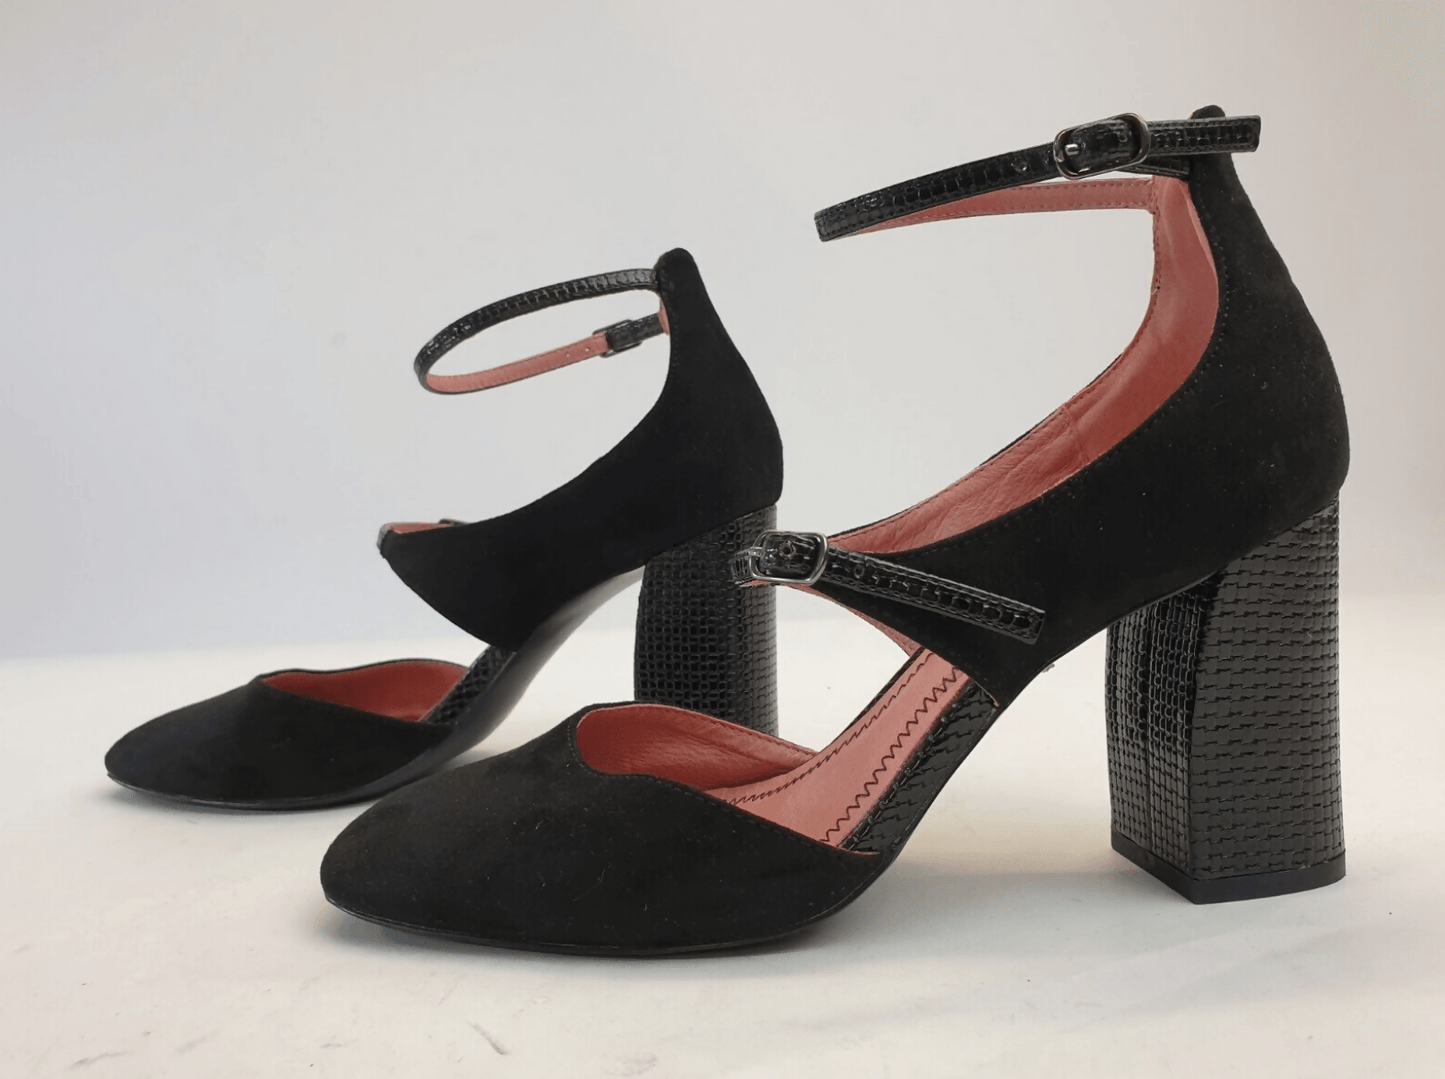 Double Strap Mary Jane Block Heels - Endless